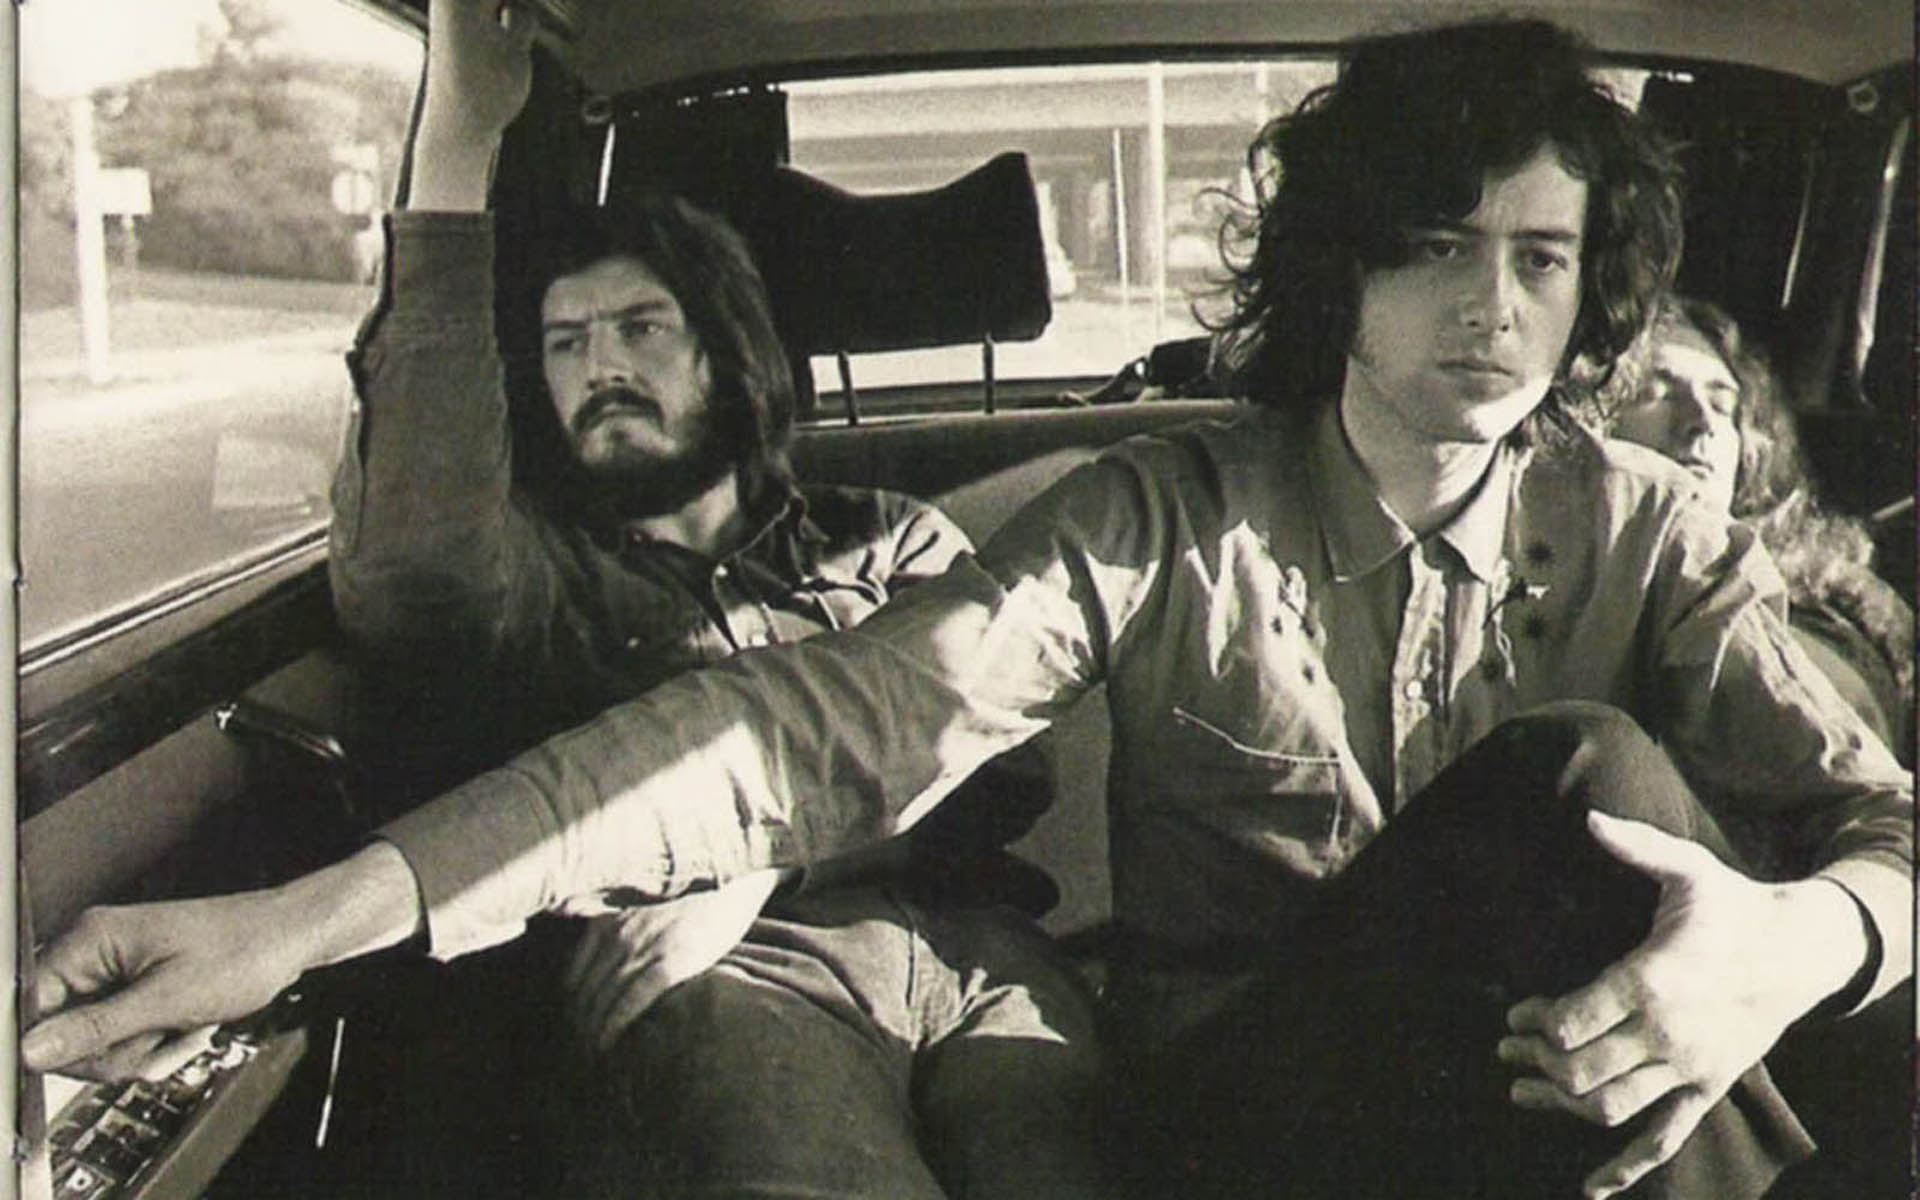 Led Zeppelin Photo 1920x1200 Wallpapers, 1920x1200 Wallpapers ...